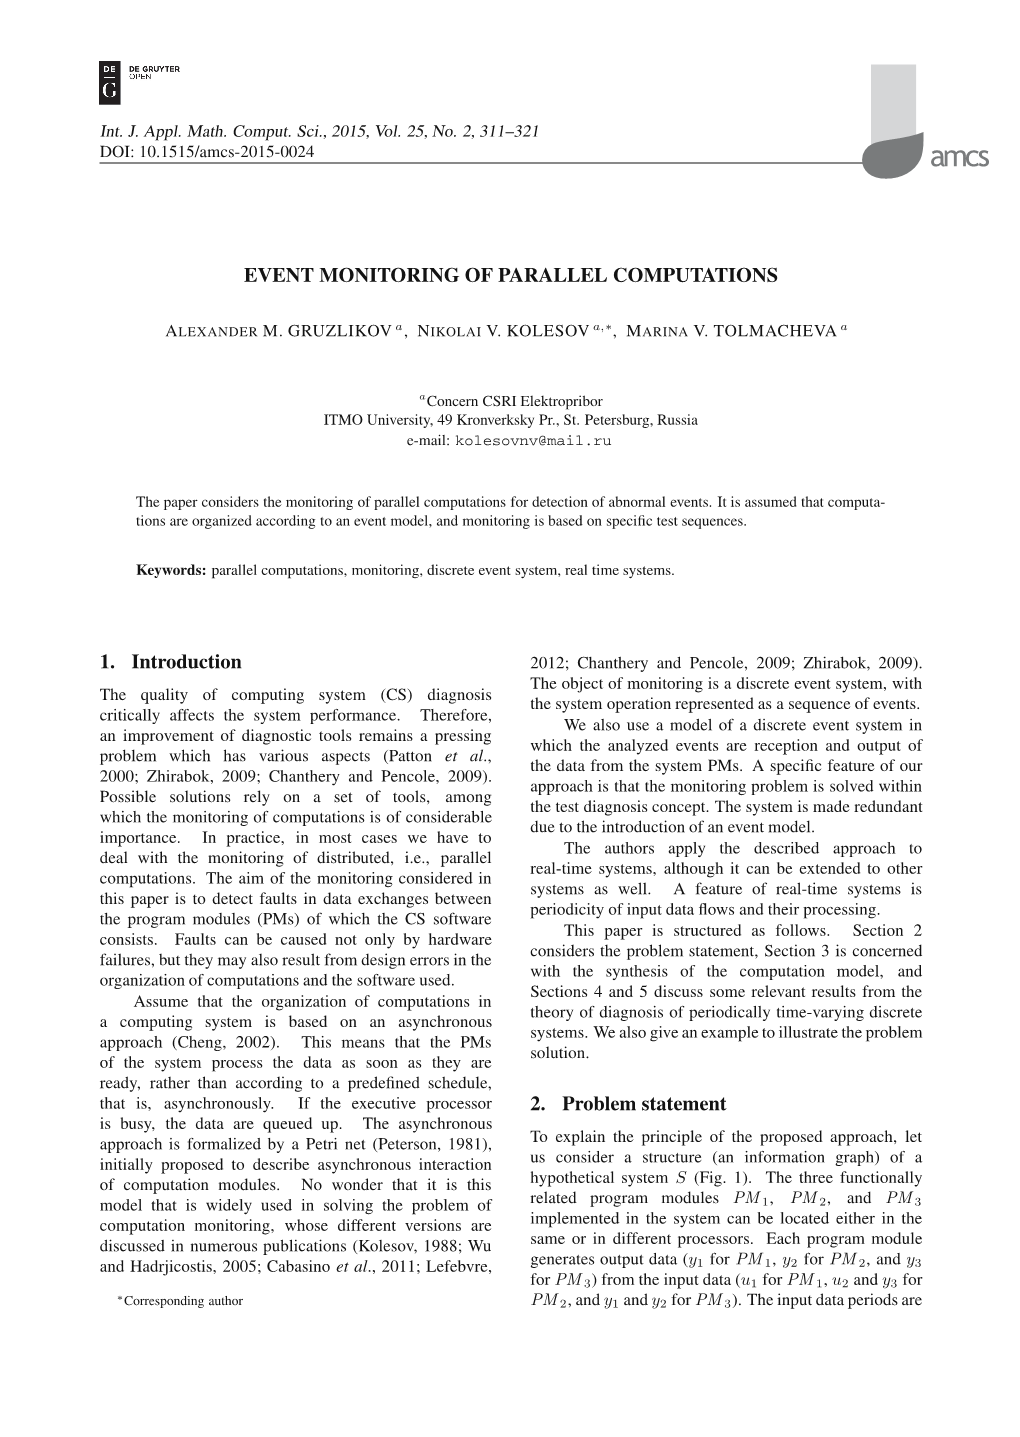 EVENT MONITORING of PARALLEL COMPUTATIONS 1. Introduction 2. Problem Statement